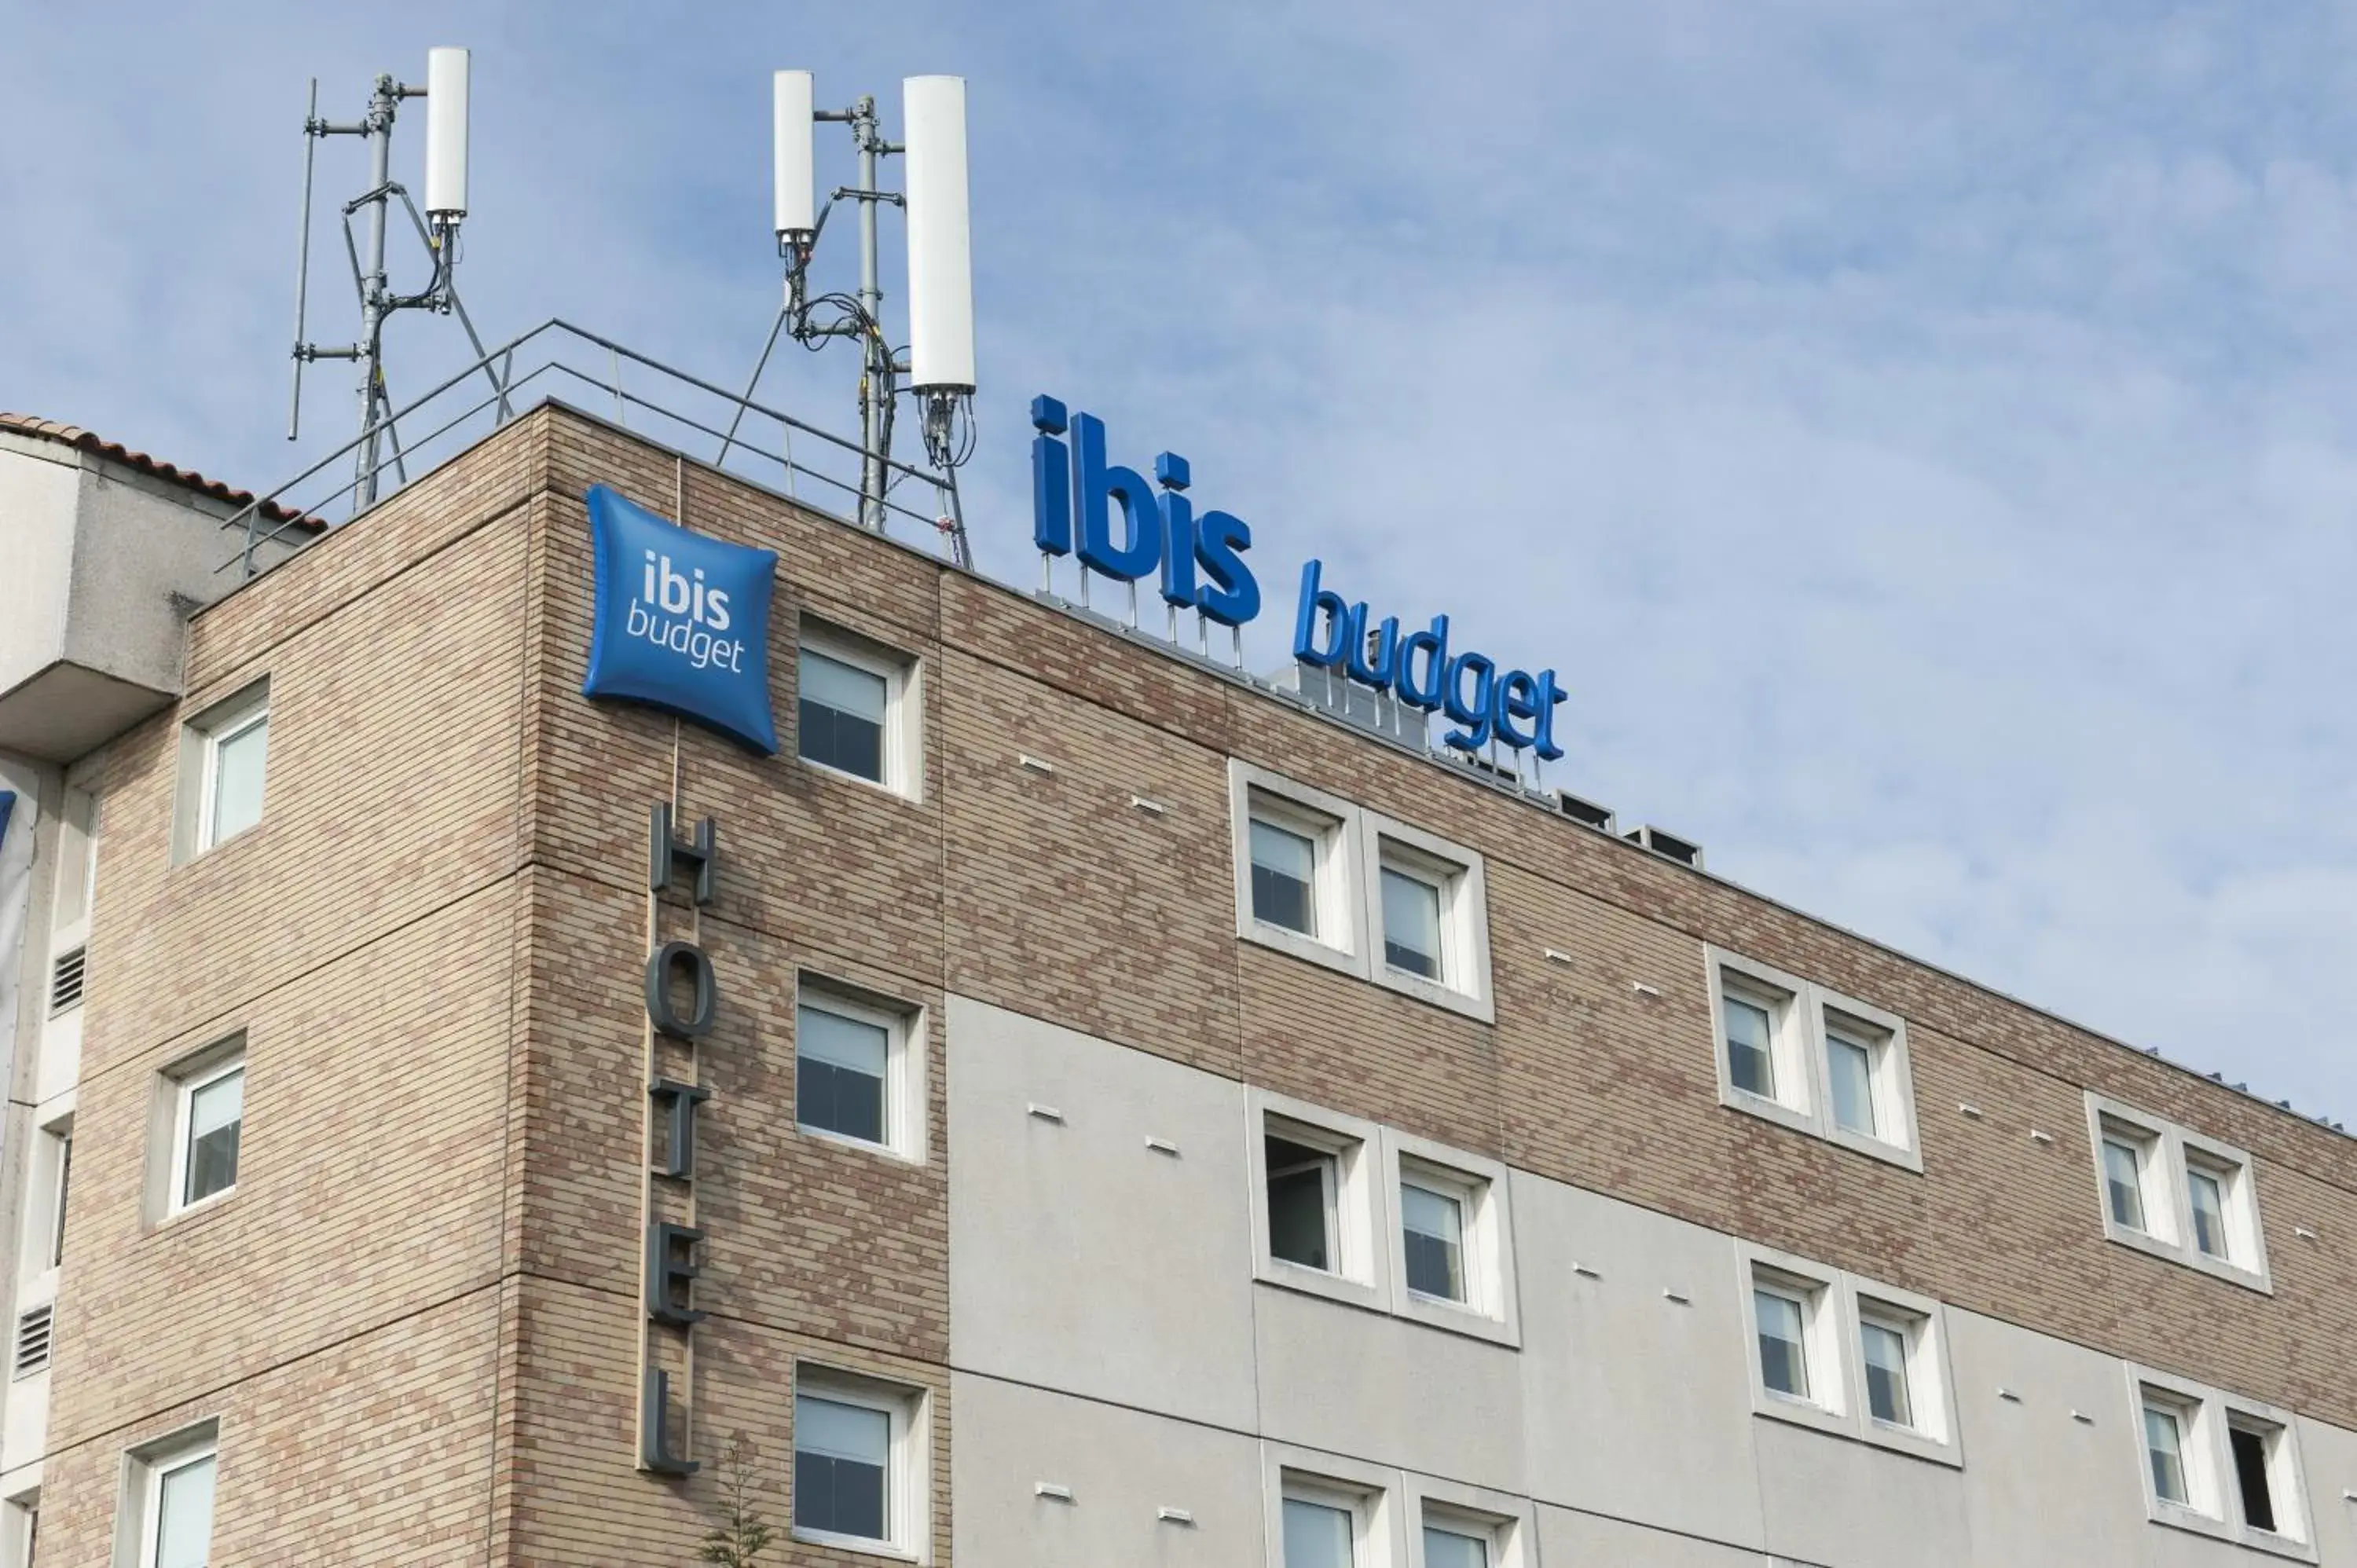 Property Building in ibis budget Goussainville Charles de Gaulle